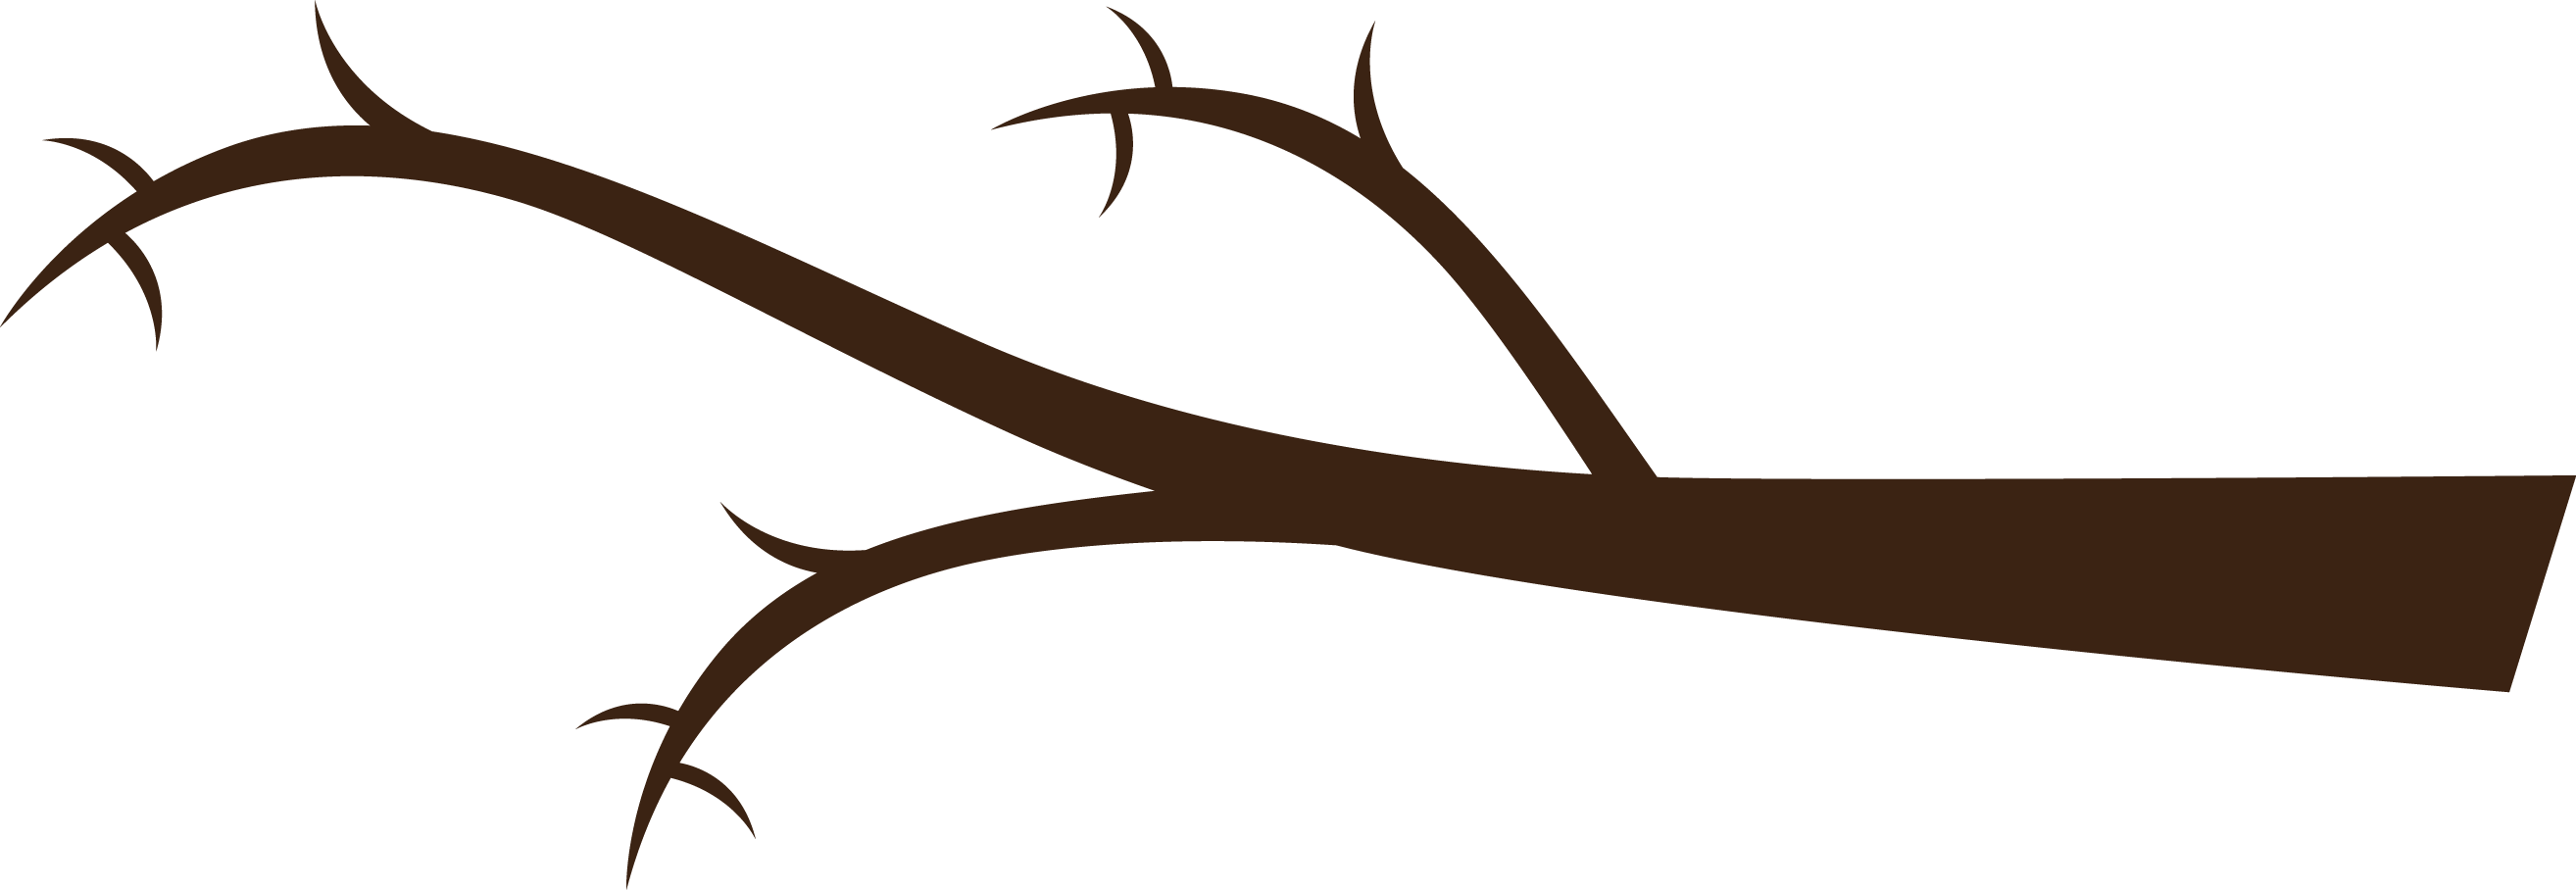 Branch of tree clipart